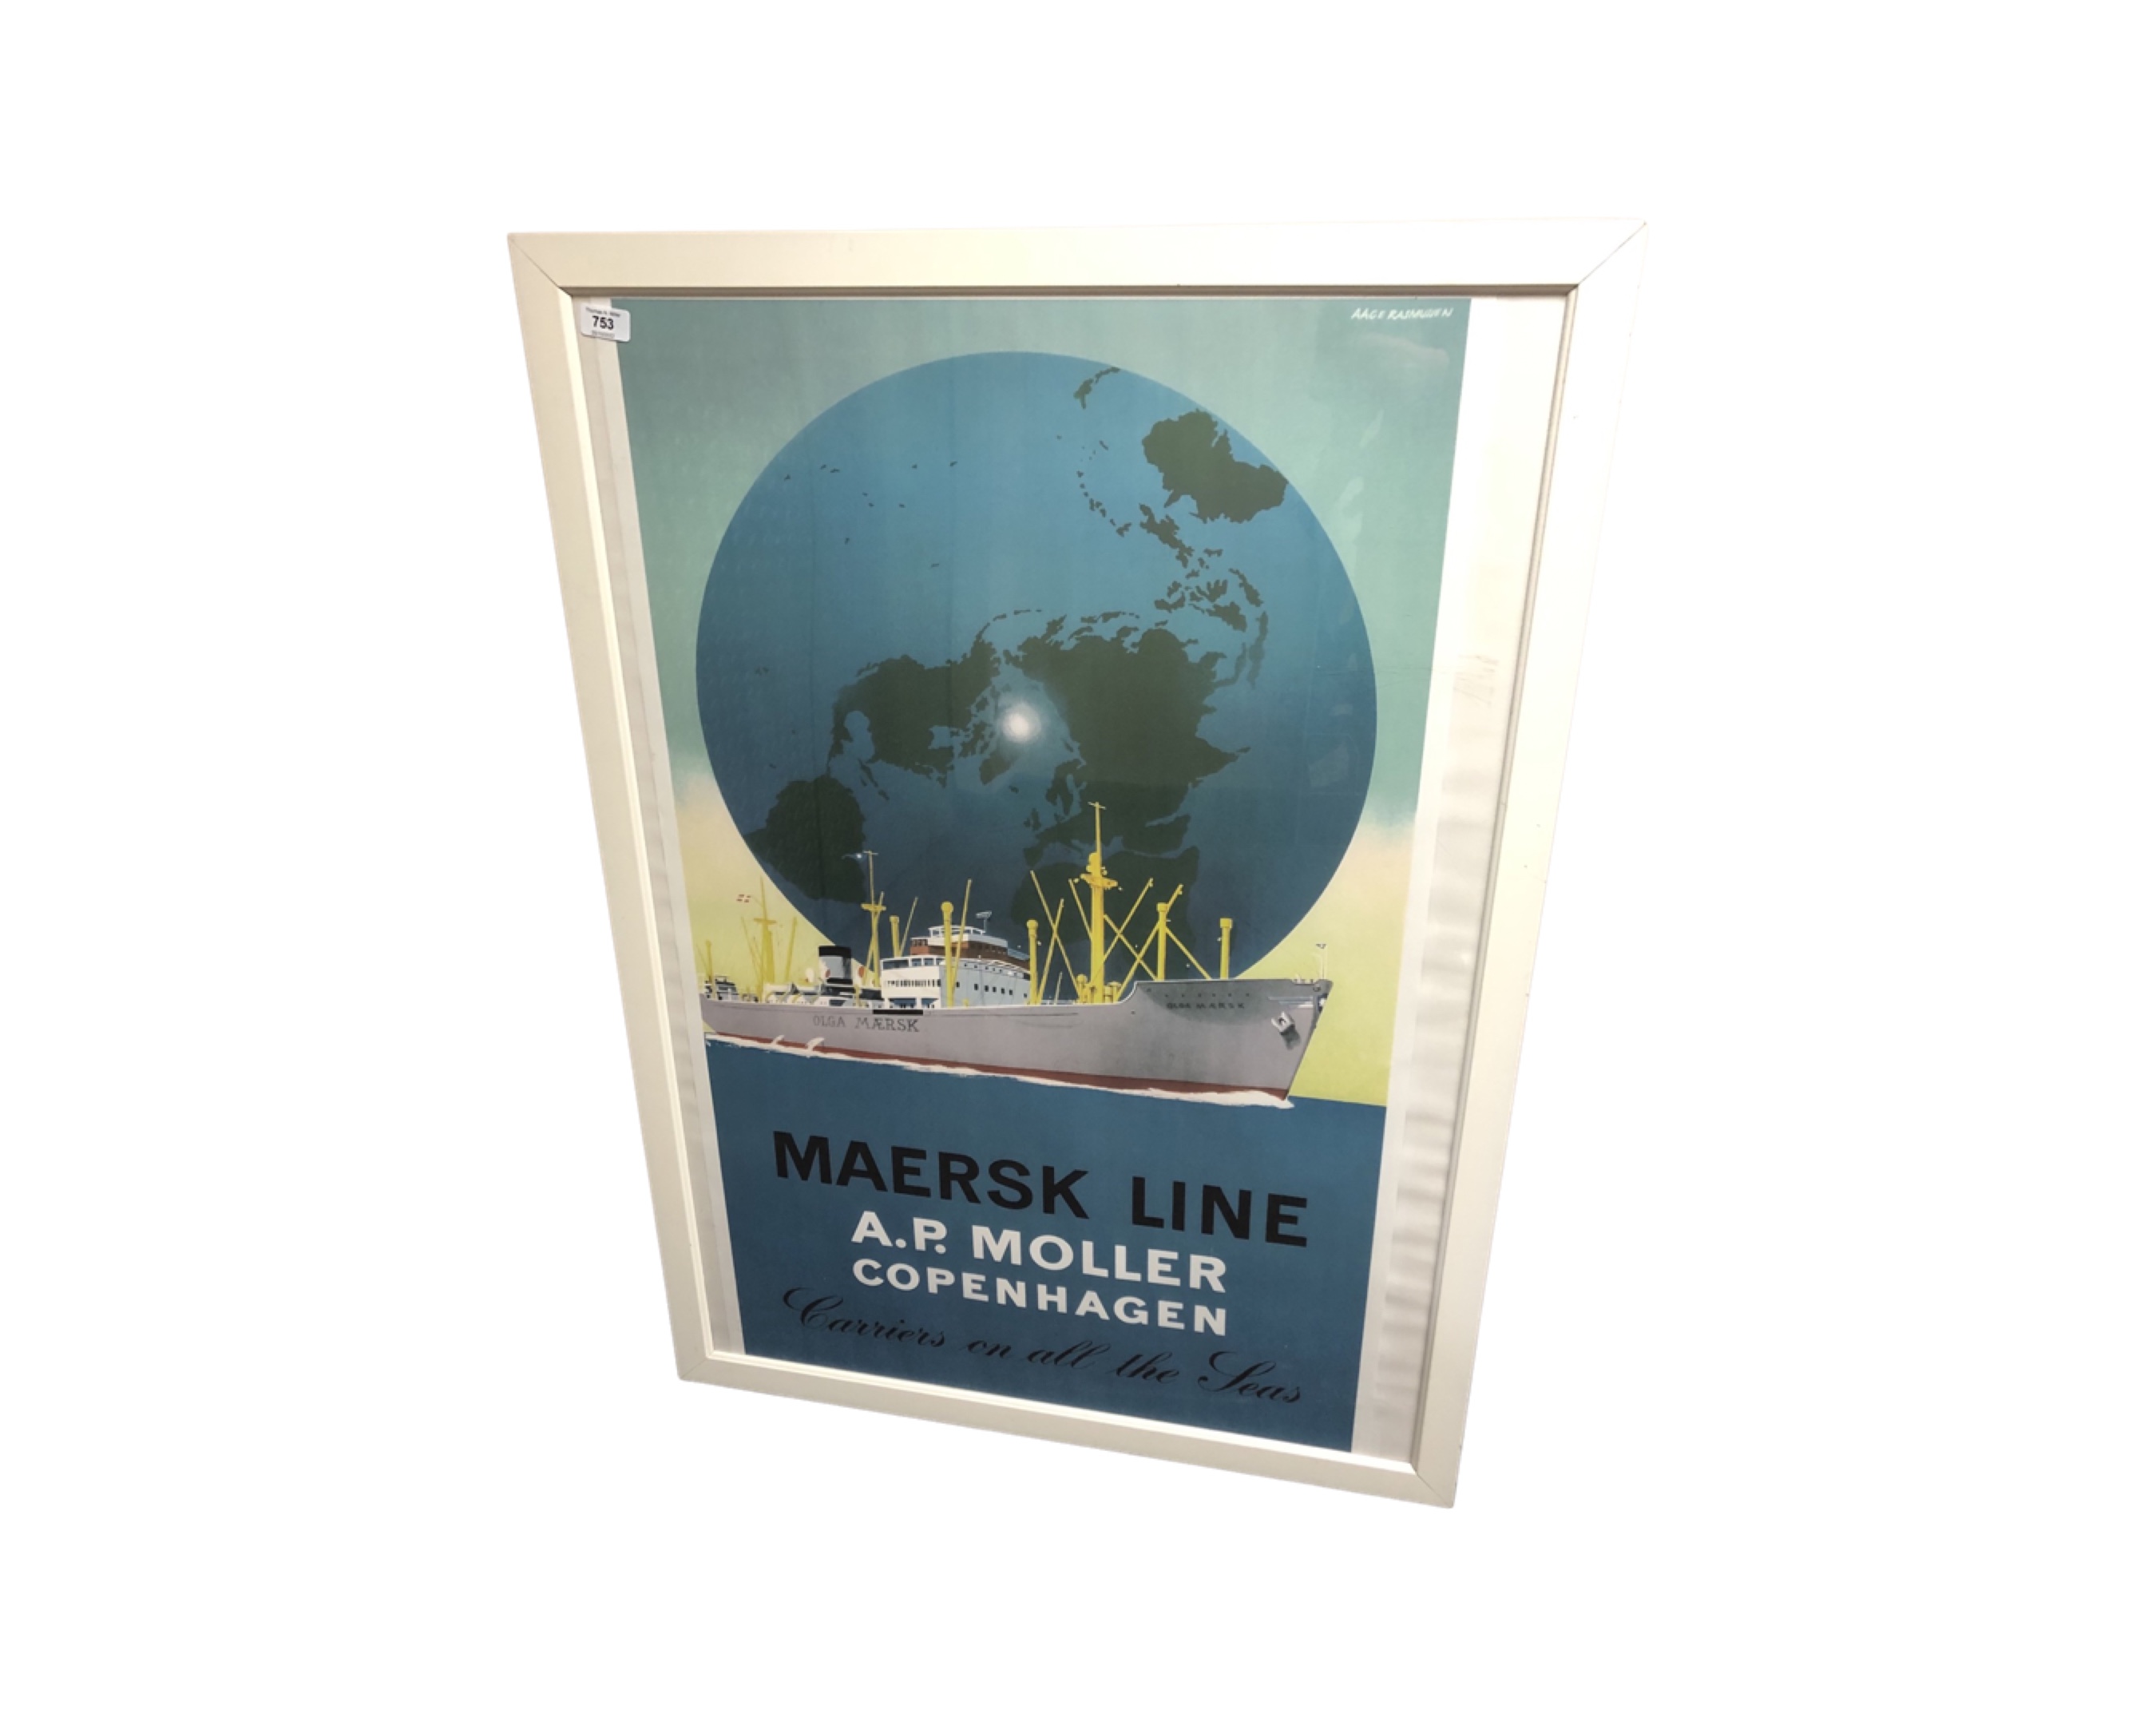 A colour print after Aage Rasmussen : Maersk Line shipping company, 100cm by 62cm.